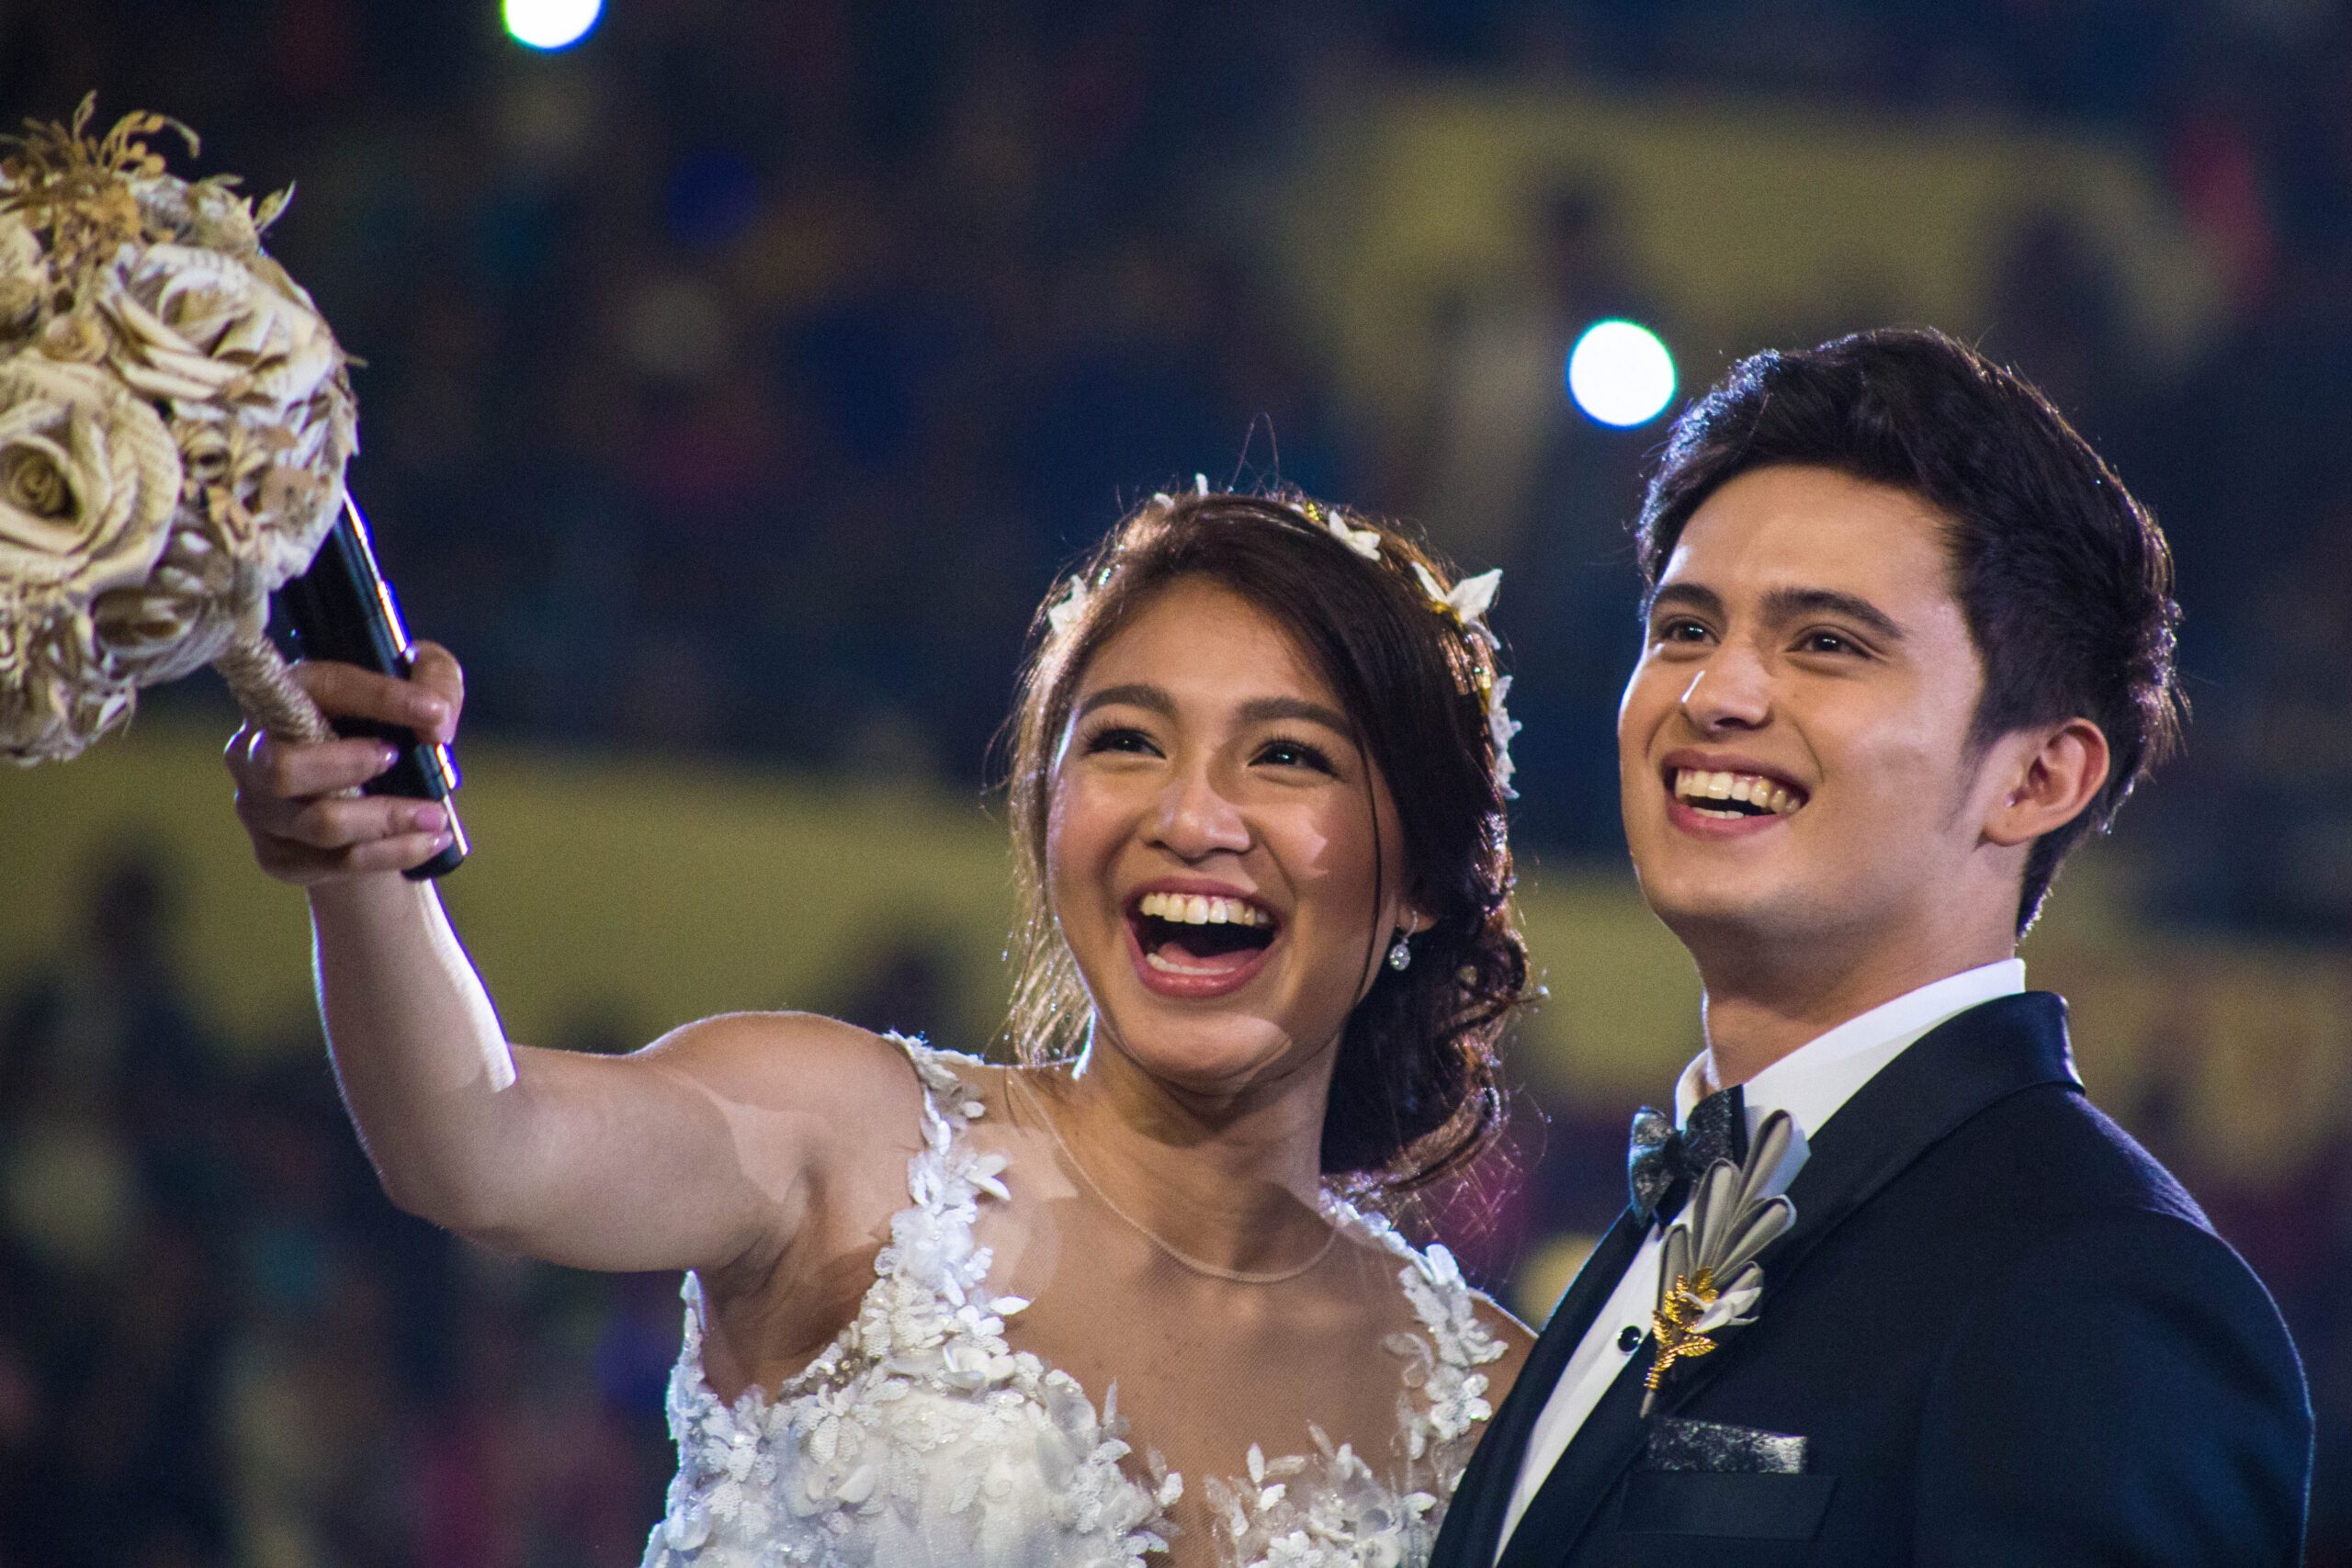 IN PHOTOS: James Reid, Nadine Lustre share sweet moments at ‘OTWOL’ finale viewing